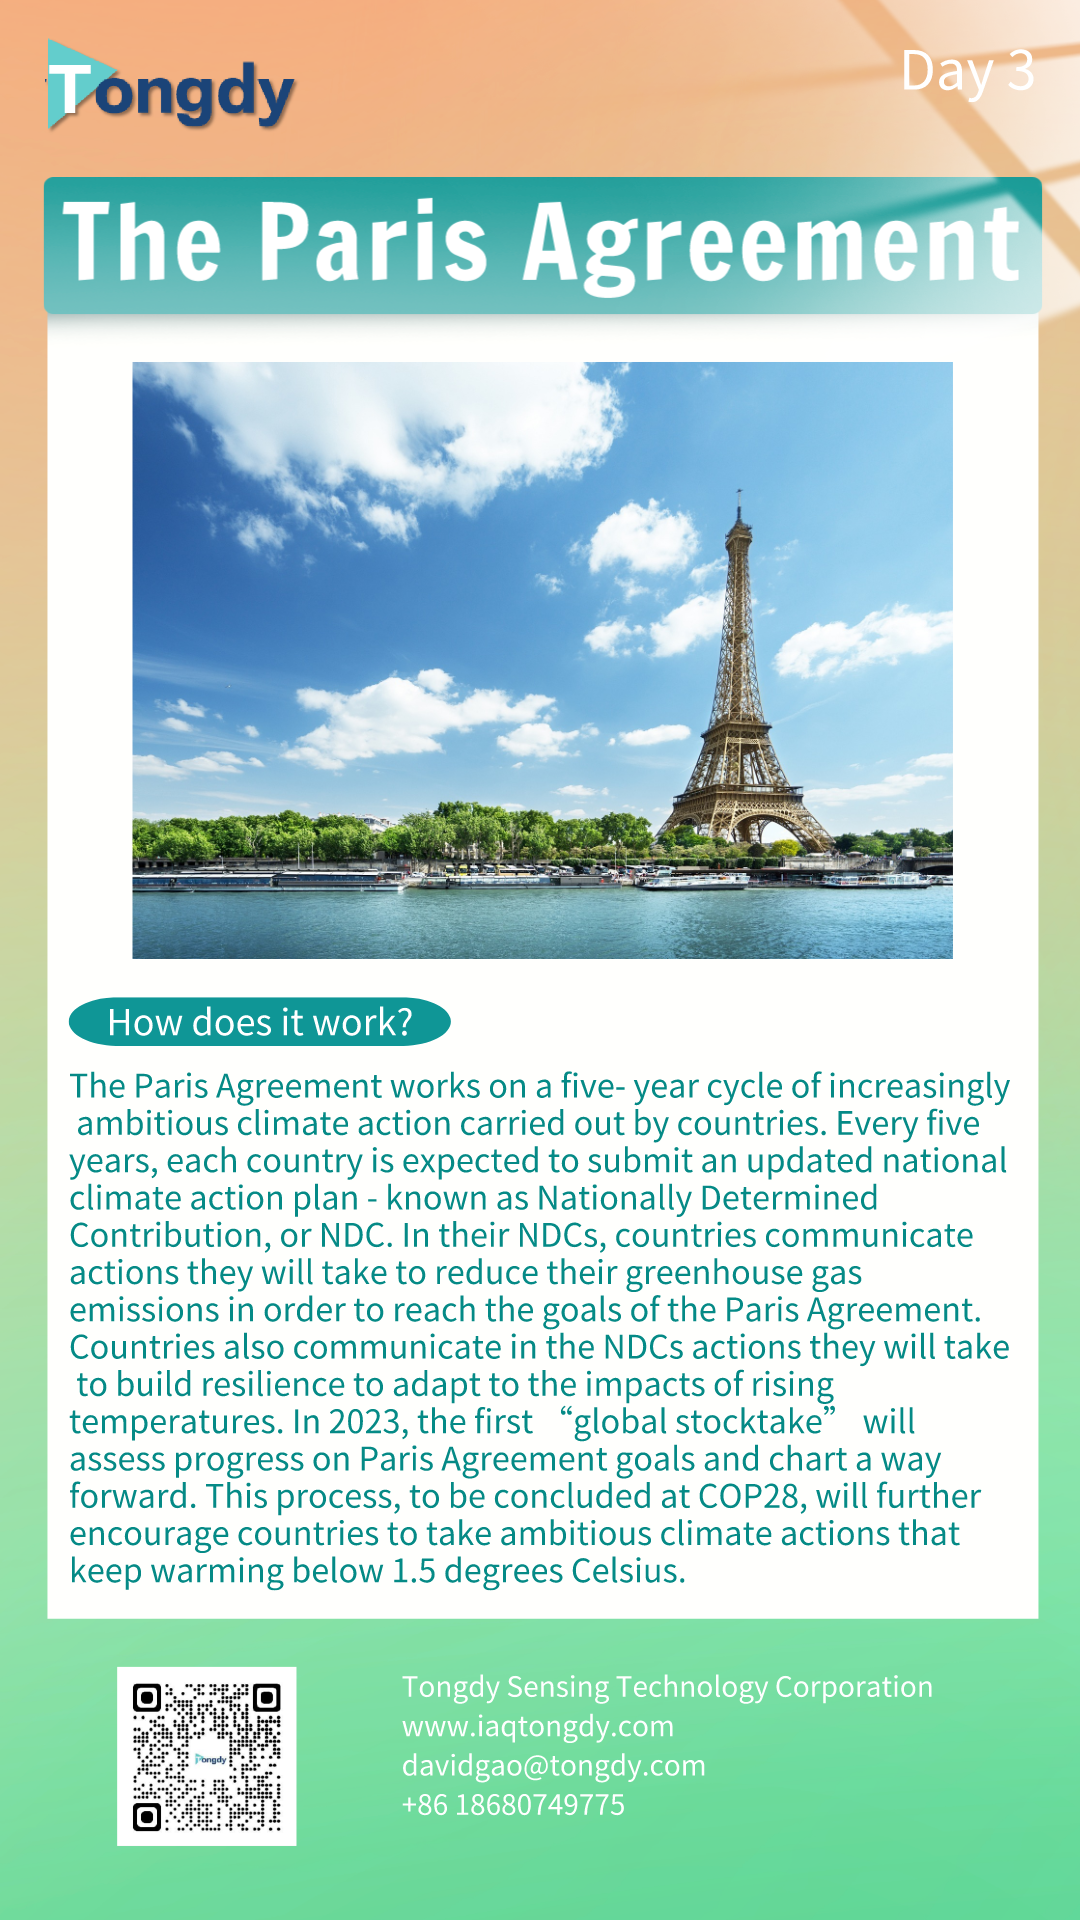 Day 3 The Paris Agreement